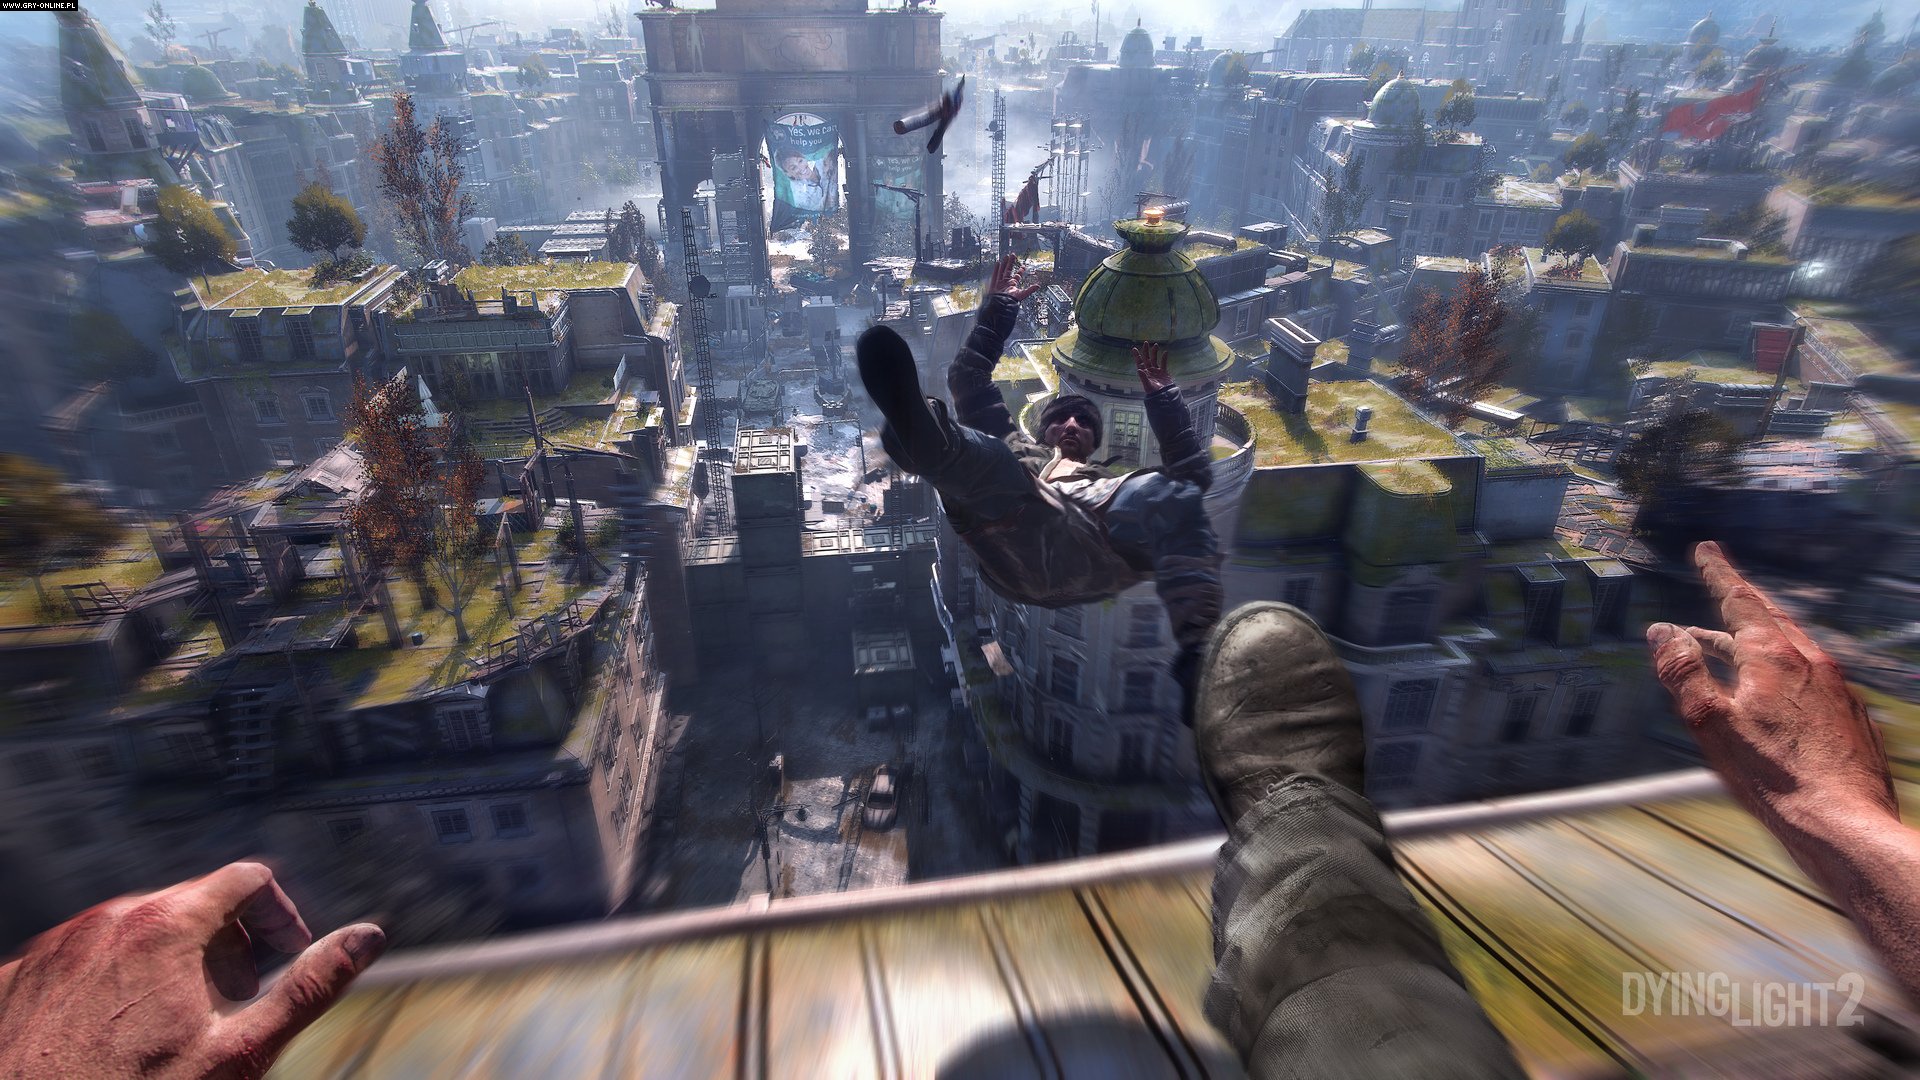 Dying Light 2 Interview – Secrets, Gameplay Elements, And More